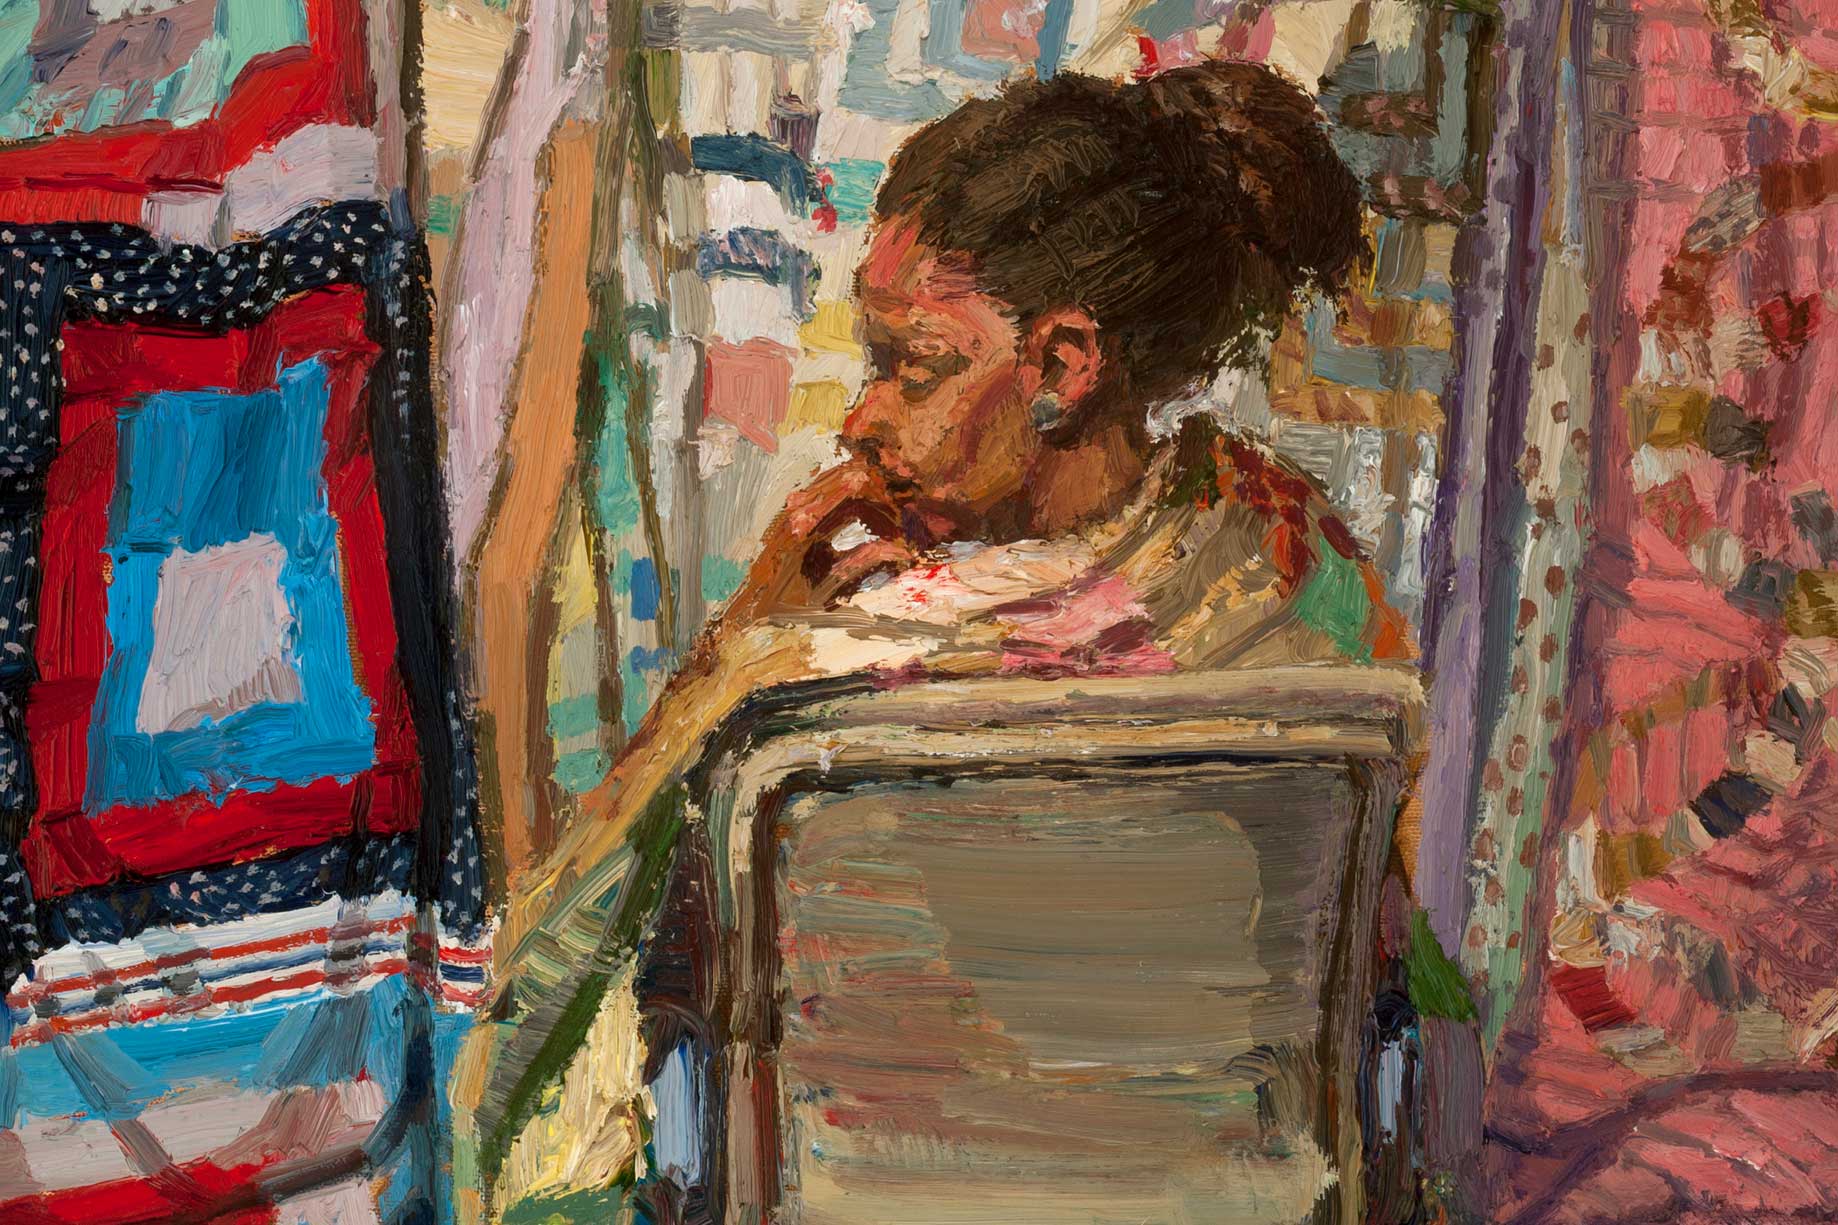 Sedrick Huckaby, She Wore Her Family’s Quilt, 2015, oil on canvas. Photo by Gregory Staley, © Sedrick Huckaby